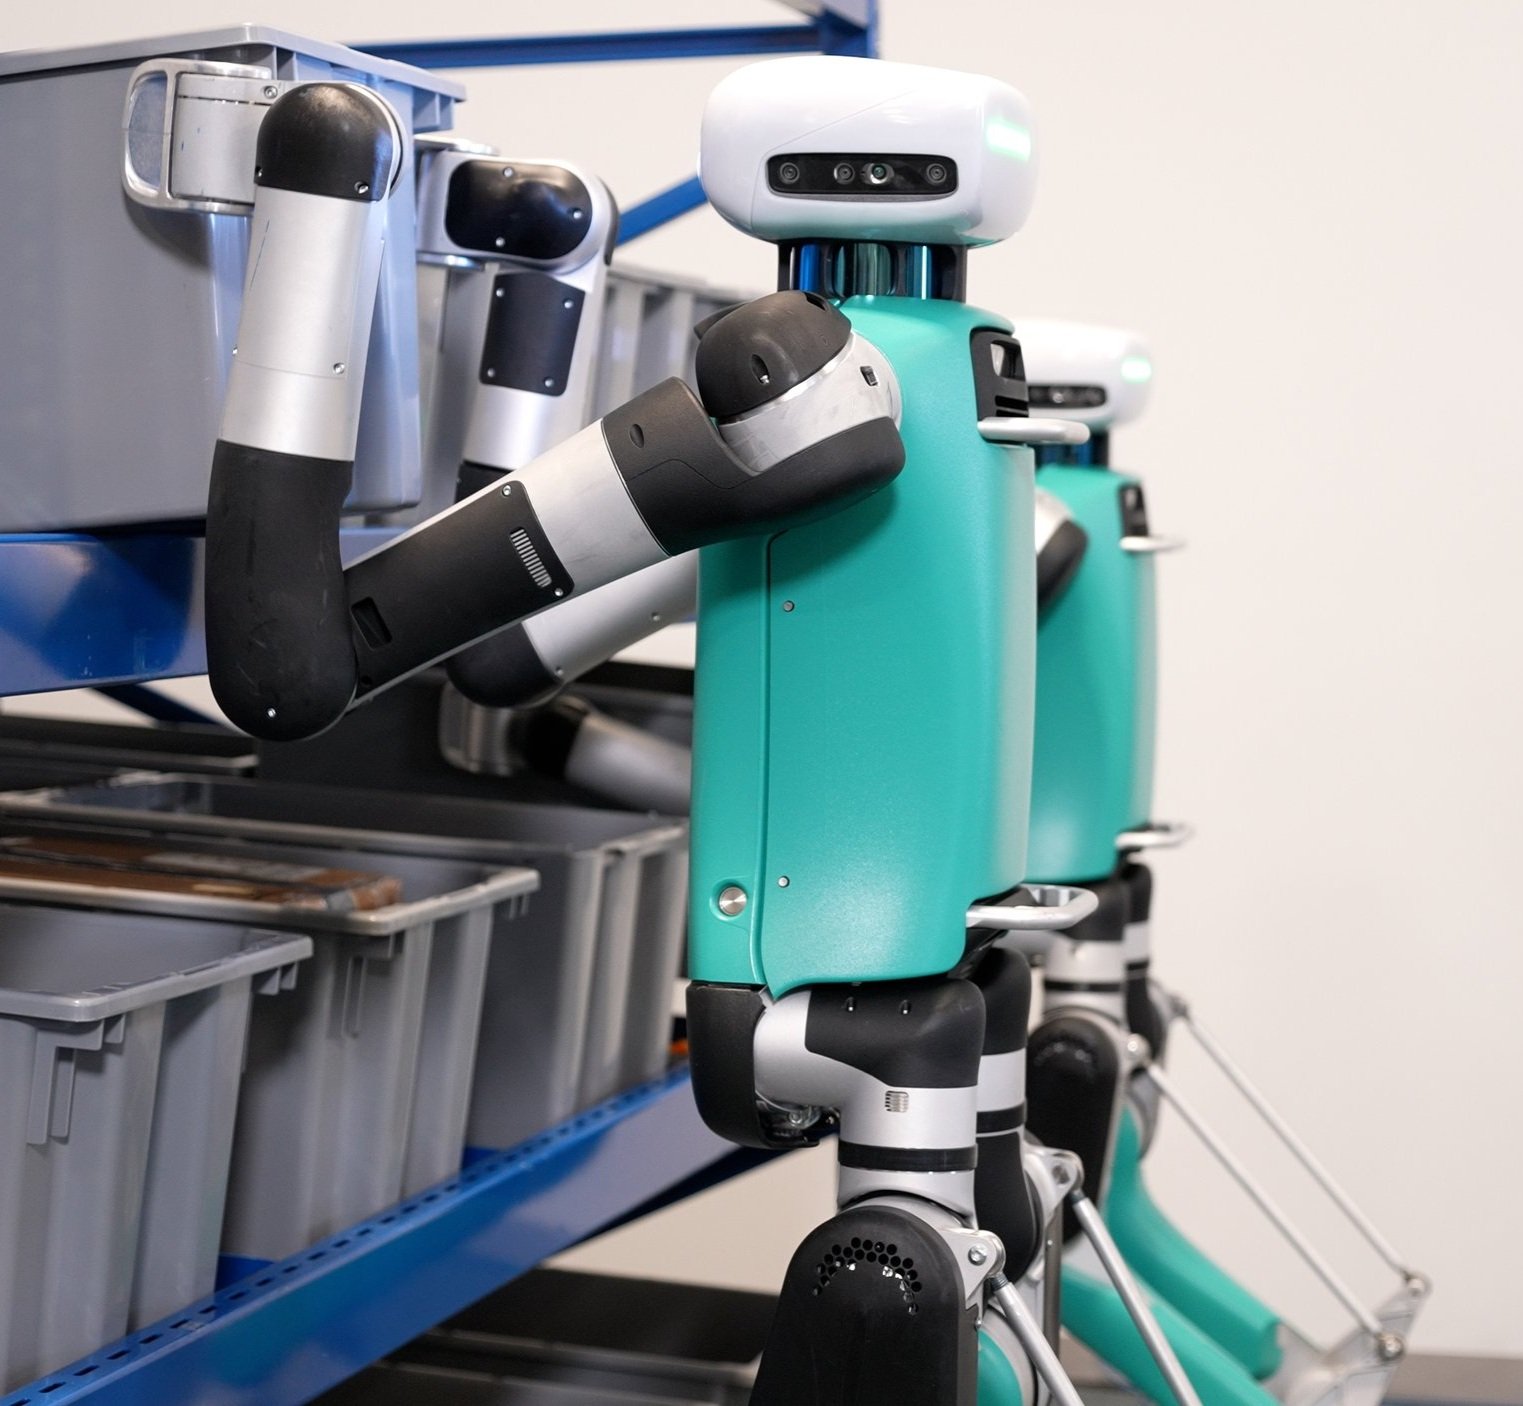 Agility Robotics Launches Next Generation of Digit: World's First Human-Centric, Multi-Purpose Robot Logistics Work — Agility Robotics